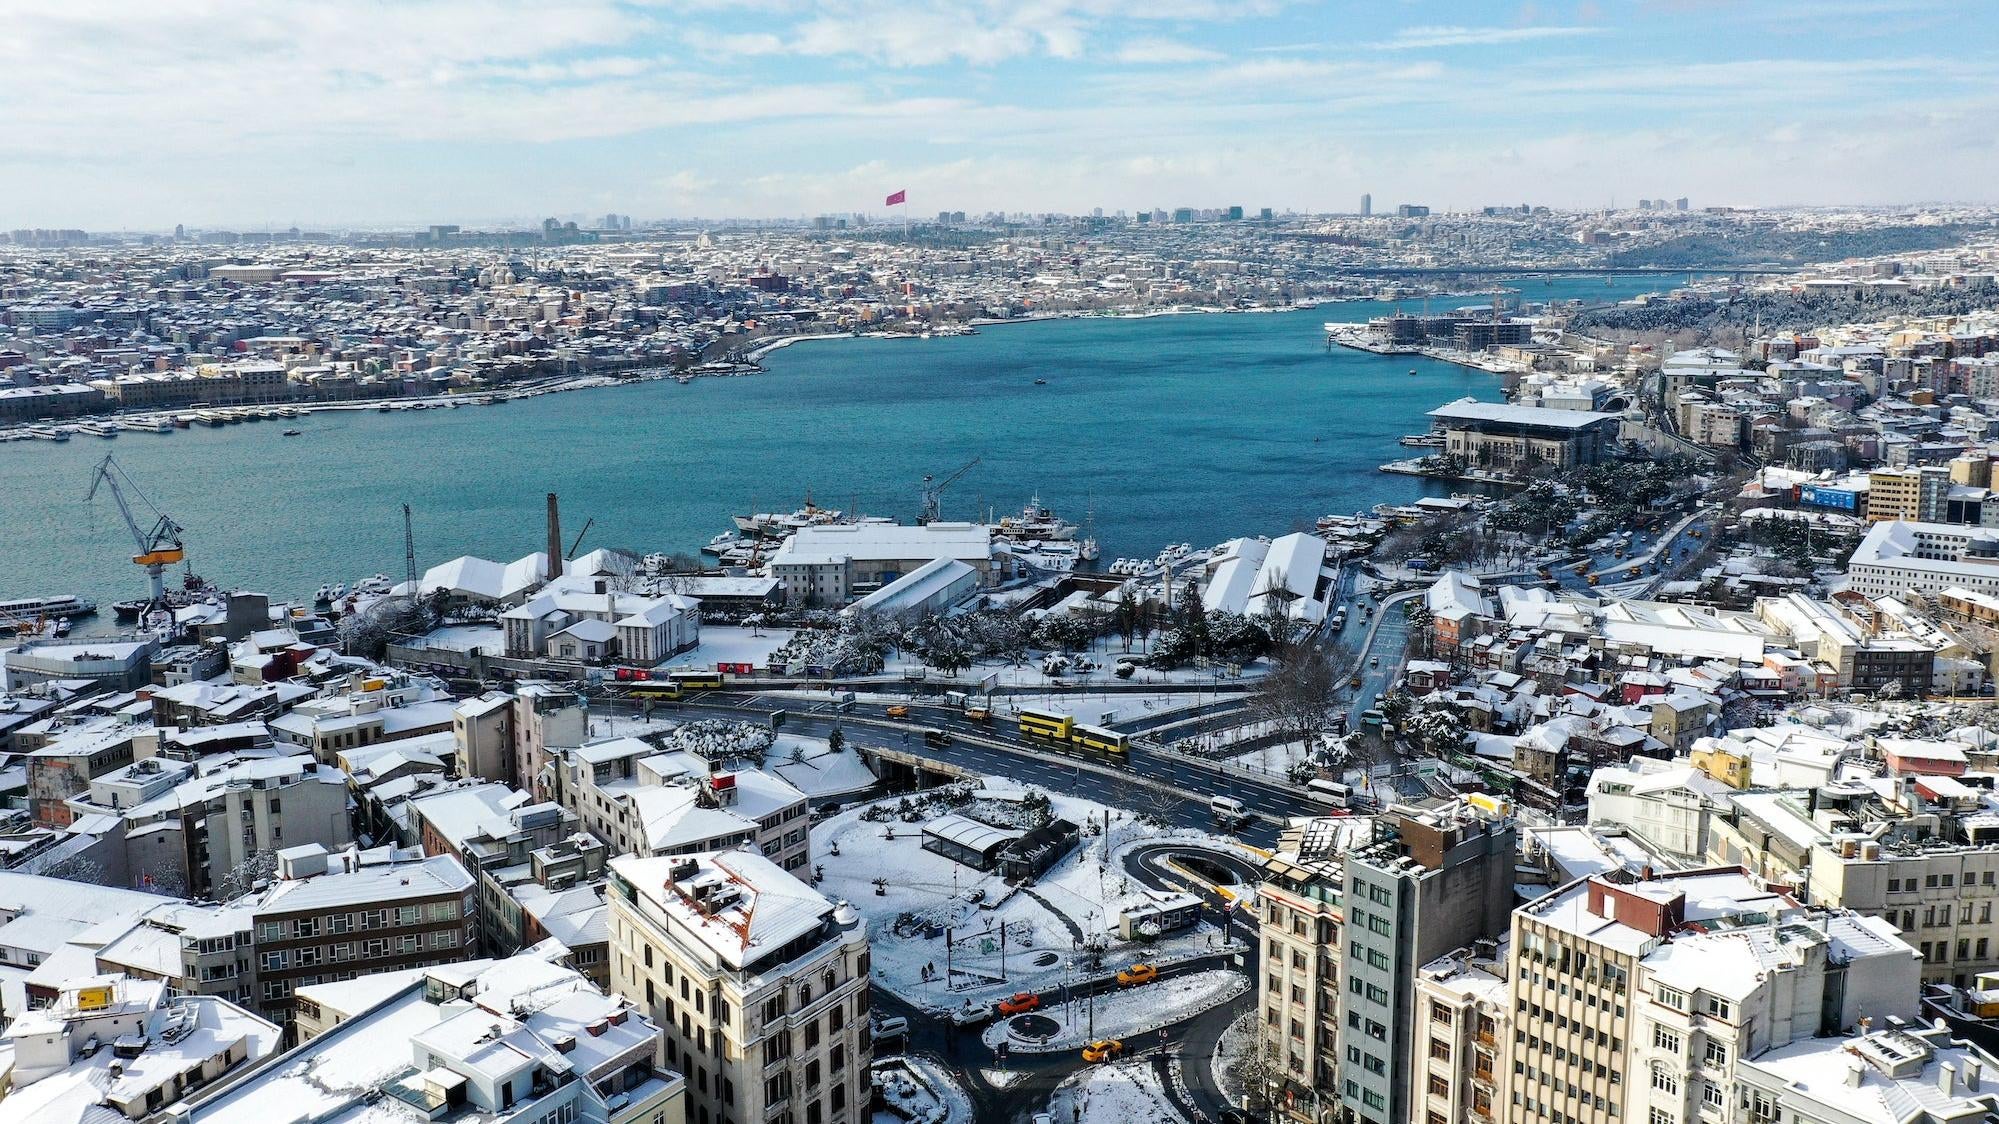 A drone photo shows an aerial view of Halic and its surroundings after heavy snowfall in Istanbul. (Photo: Muhammed Enes Yildirim/Anadolu Agency, Getty Images)